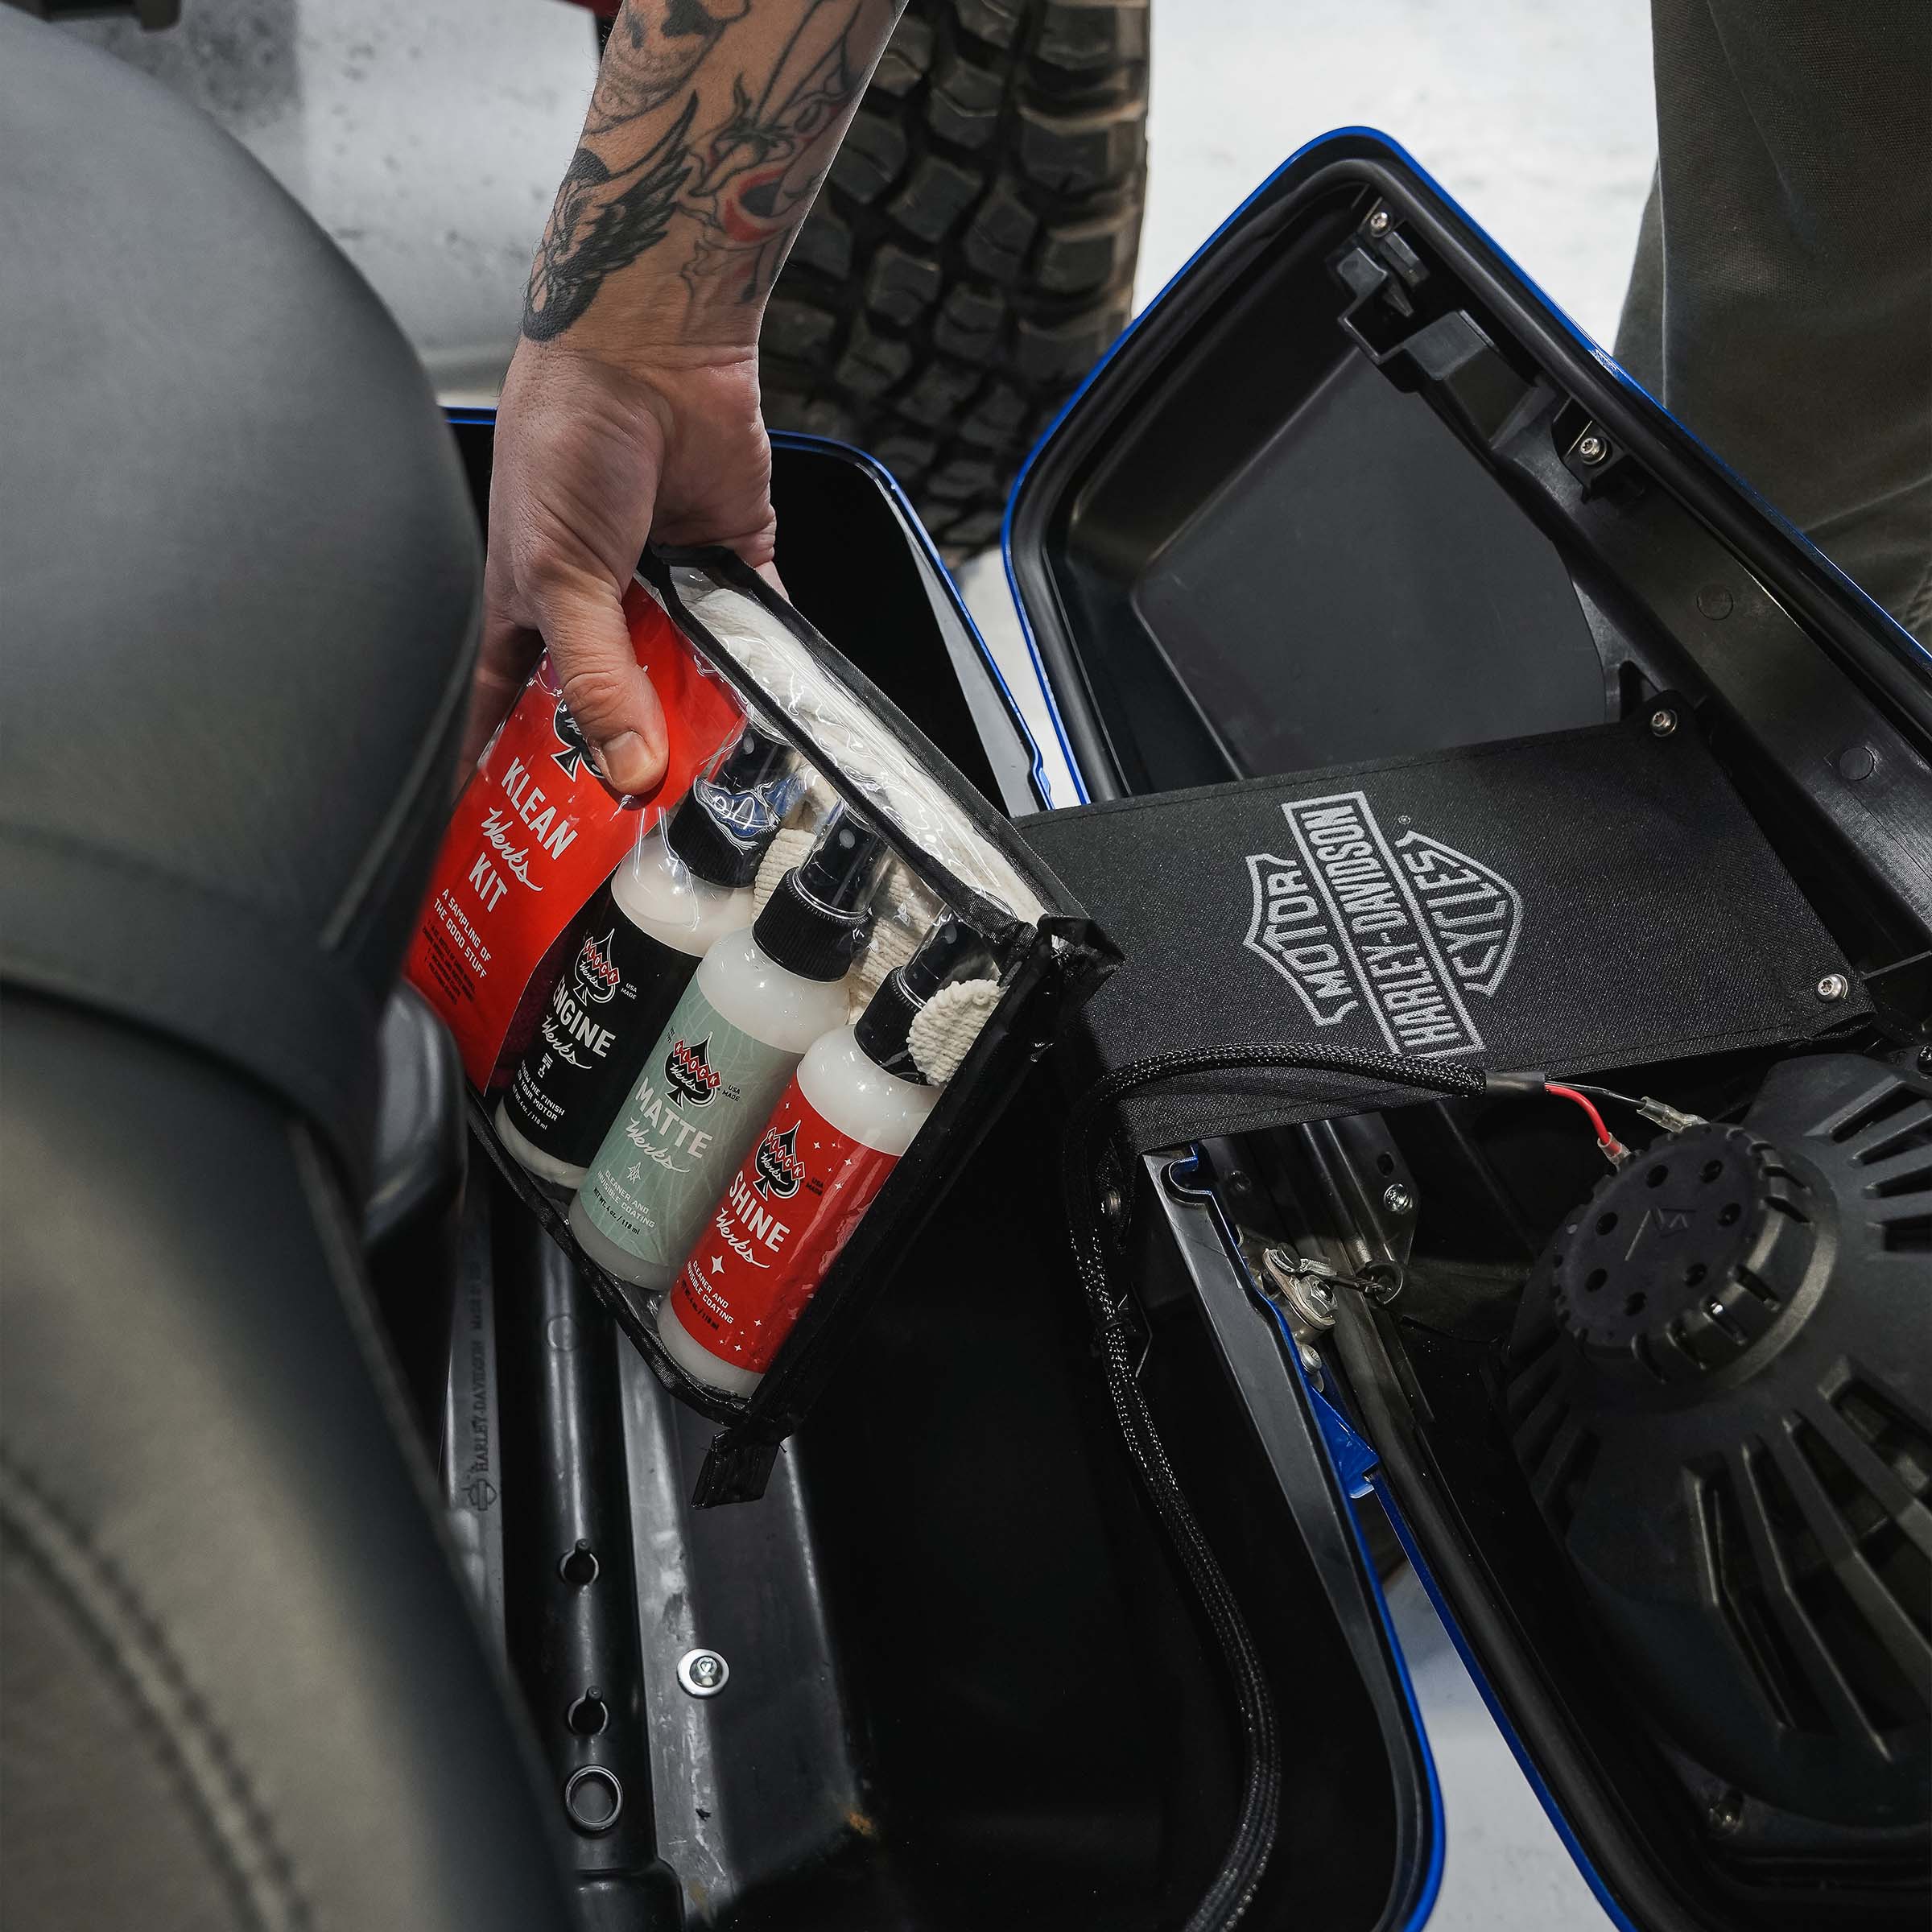 Klean Werks Cleaning Kit fits easily in your motorcycle saddlebag!(Easy to carry in your saddlebag!)